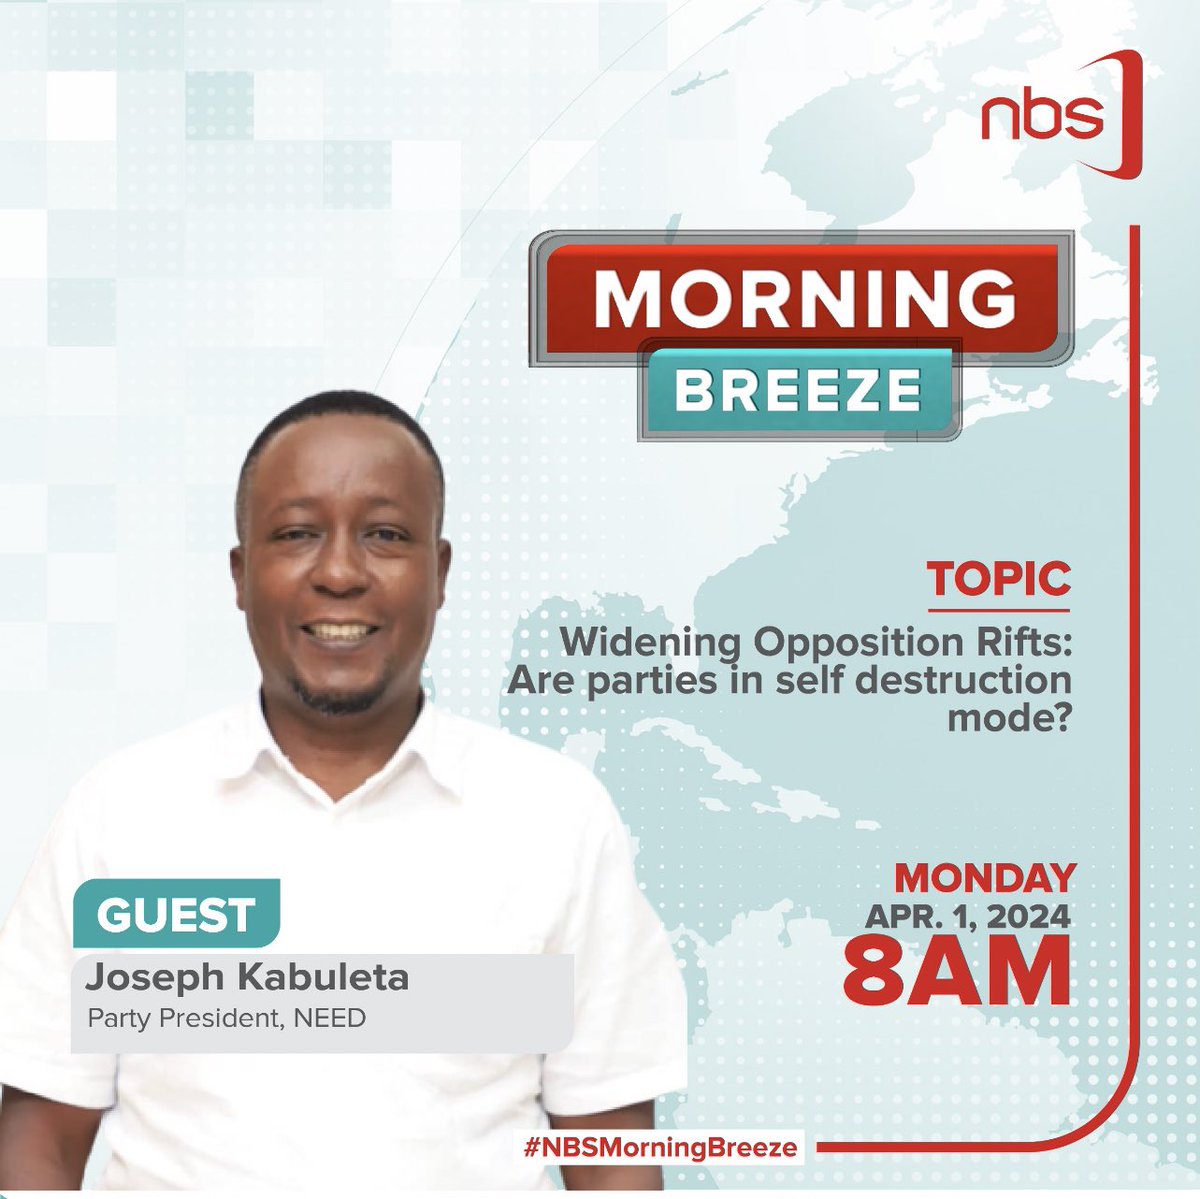 I will be hosted by NBS tomorrow morning.